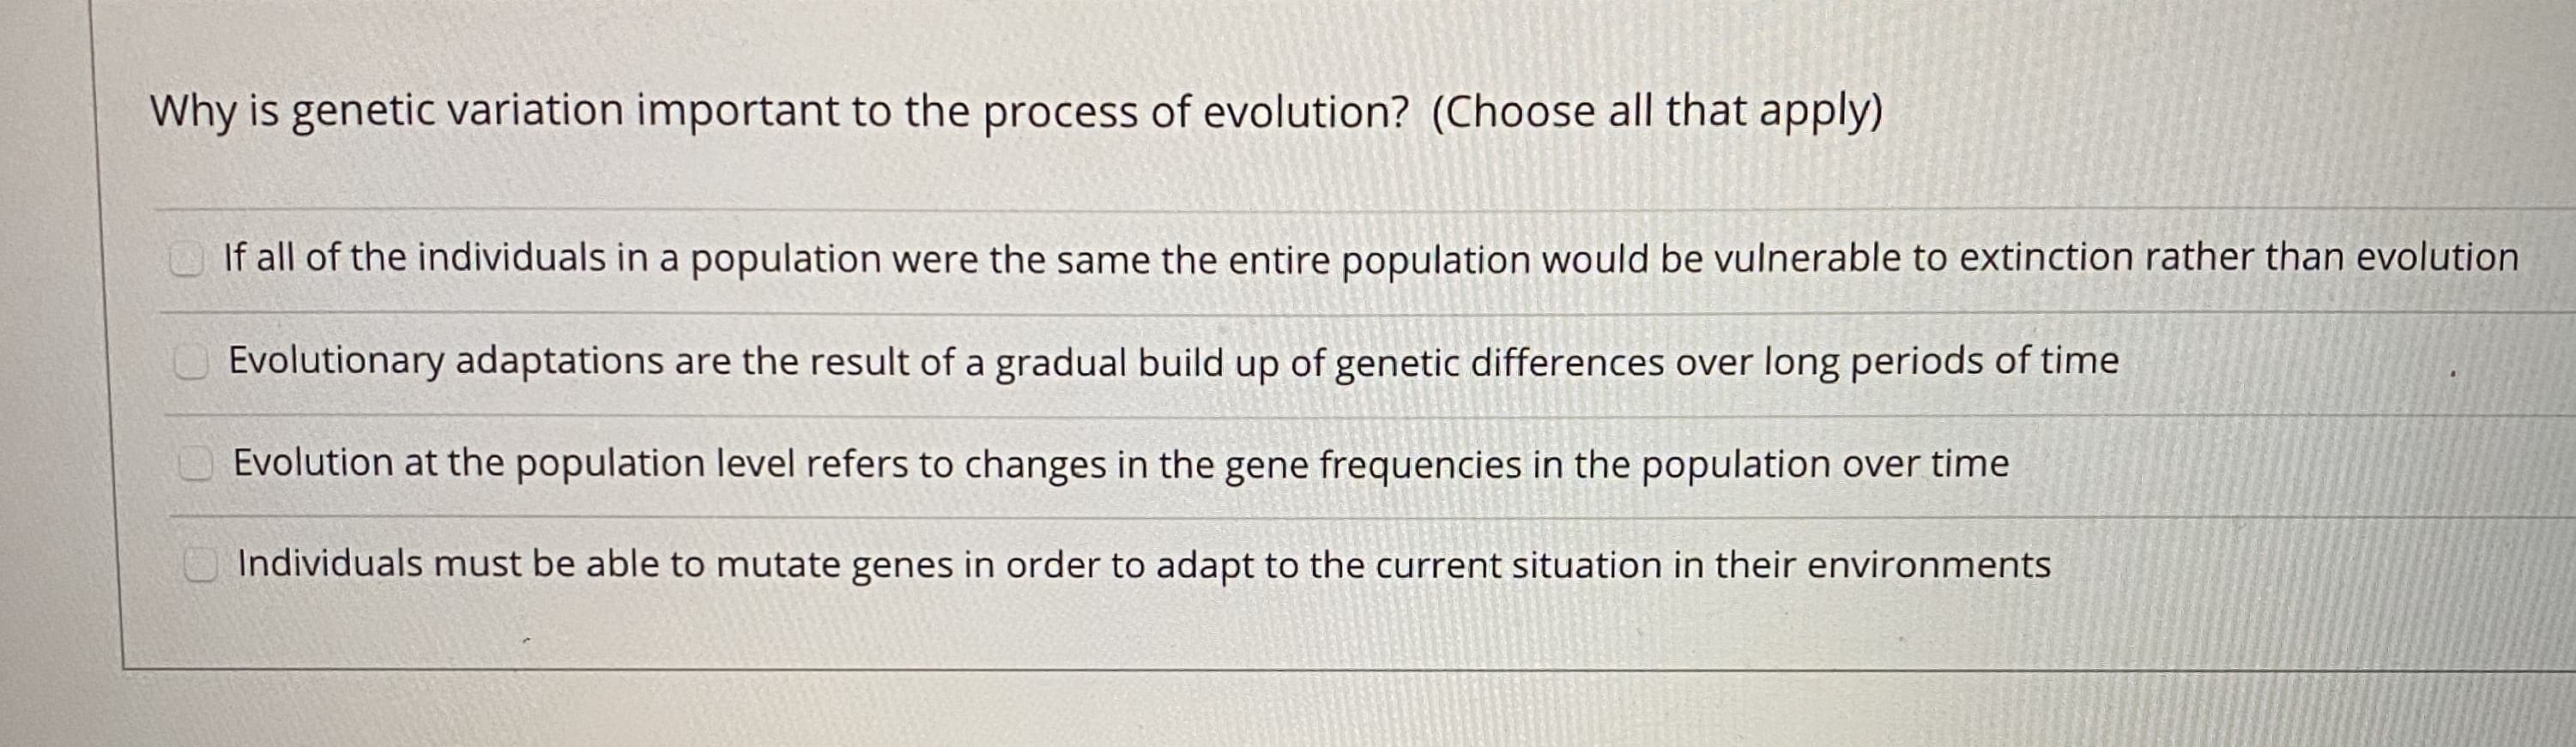 Why is genetic variation important to the process of evolution? (Choose all that apply)
If all of the individuals in a population were the same the entire population would be vulnerable to extinction rather than evolut
Evolutionary adaptations are the result of a gradual build up of genetic differences over long periods of time
Evolution at the population level refers to changes in the gene frequencies in the population over time
Individuals must be able to mutate genes in order to adapt to the current situation in their environments
